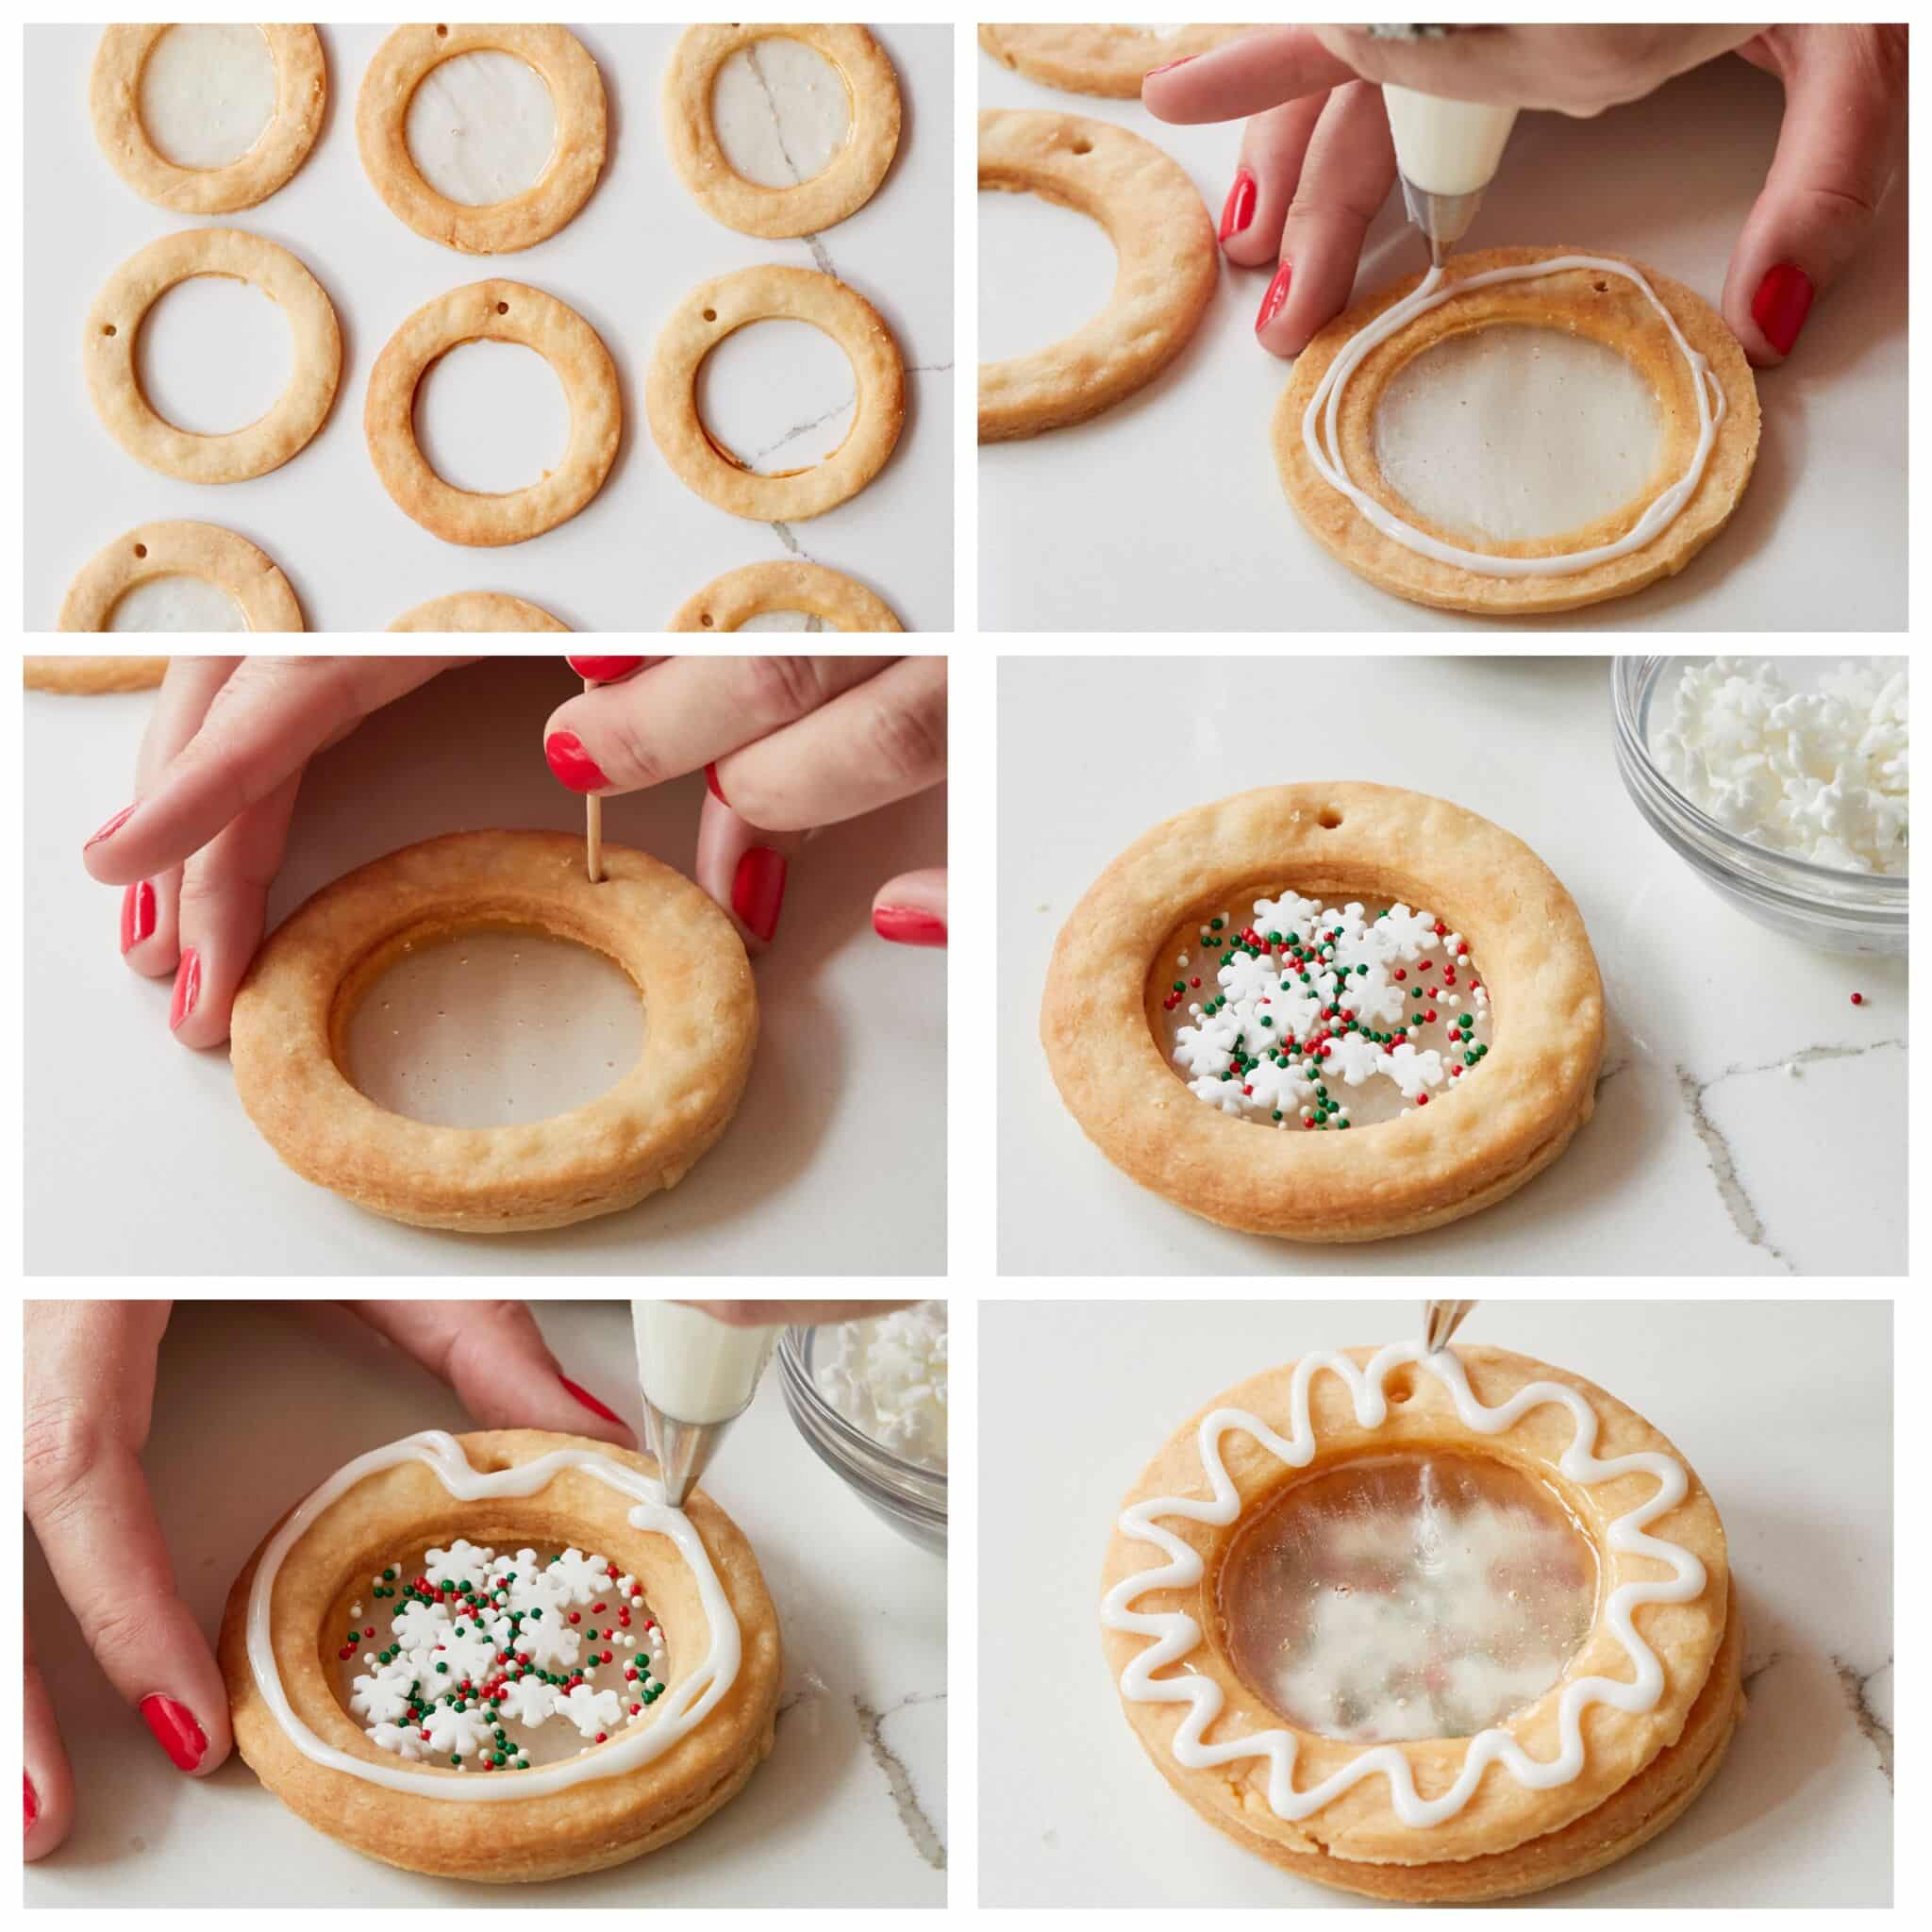 Assembling Snow Globe Cookies: To make a Snow Globe Cookie, take one candy-filled cookie and use icing to sandwich it with an empty cookie ring. Add sprinkles to the center, and then use icing to sandwich another candy-filled cookie on top. Pipe icing around the ring to decorate, and when the cookies are completely dry, thread with twine or ribbon.